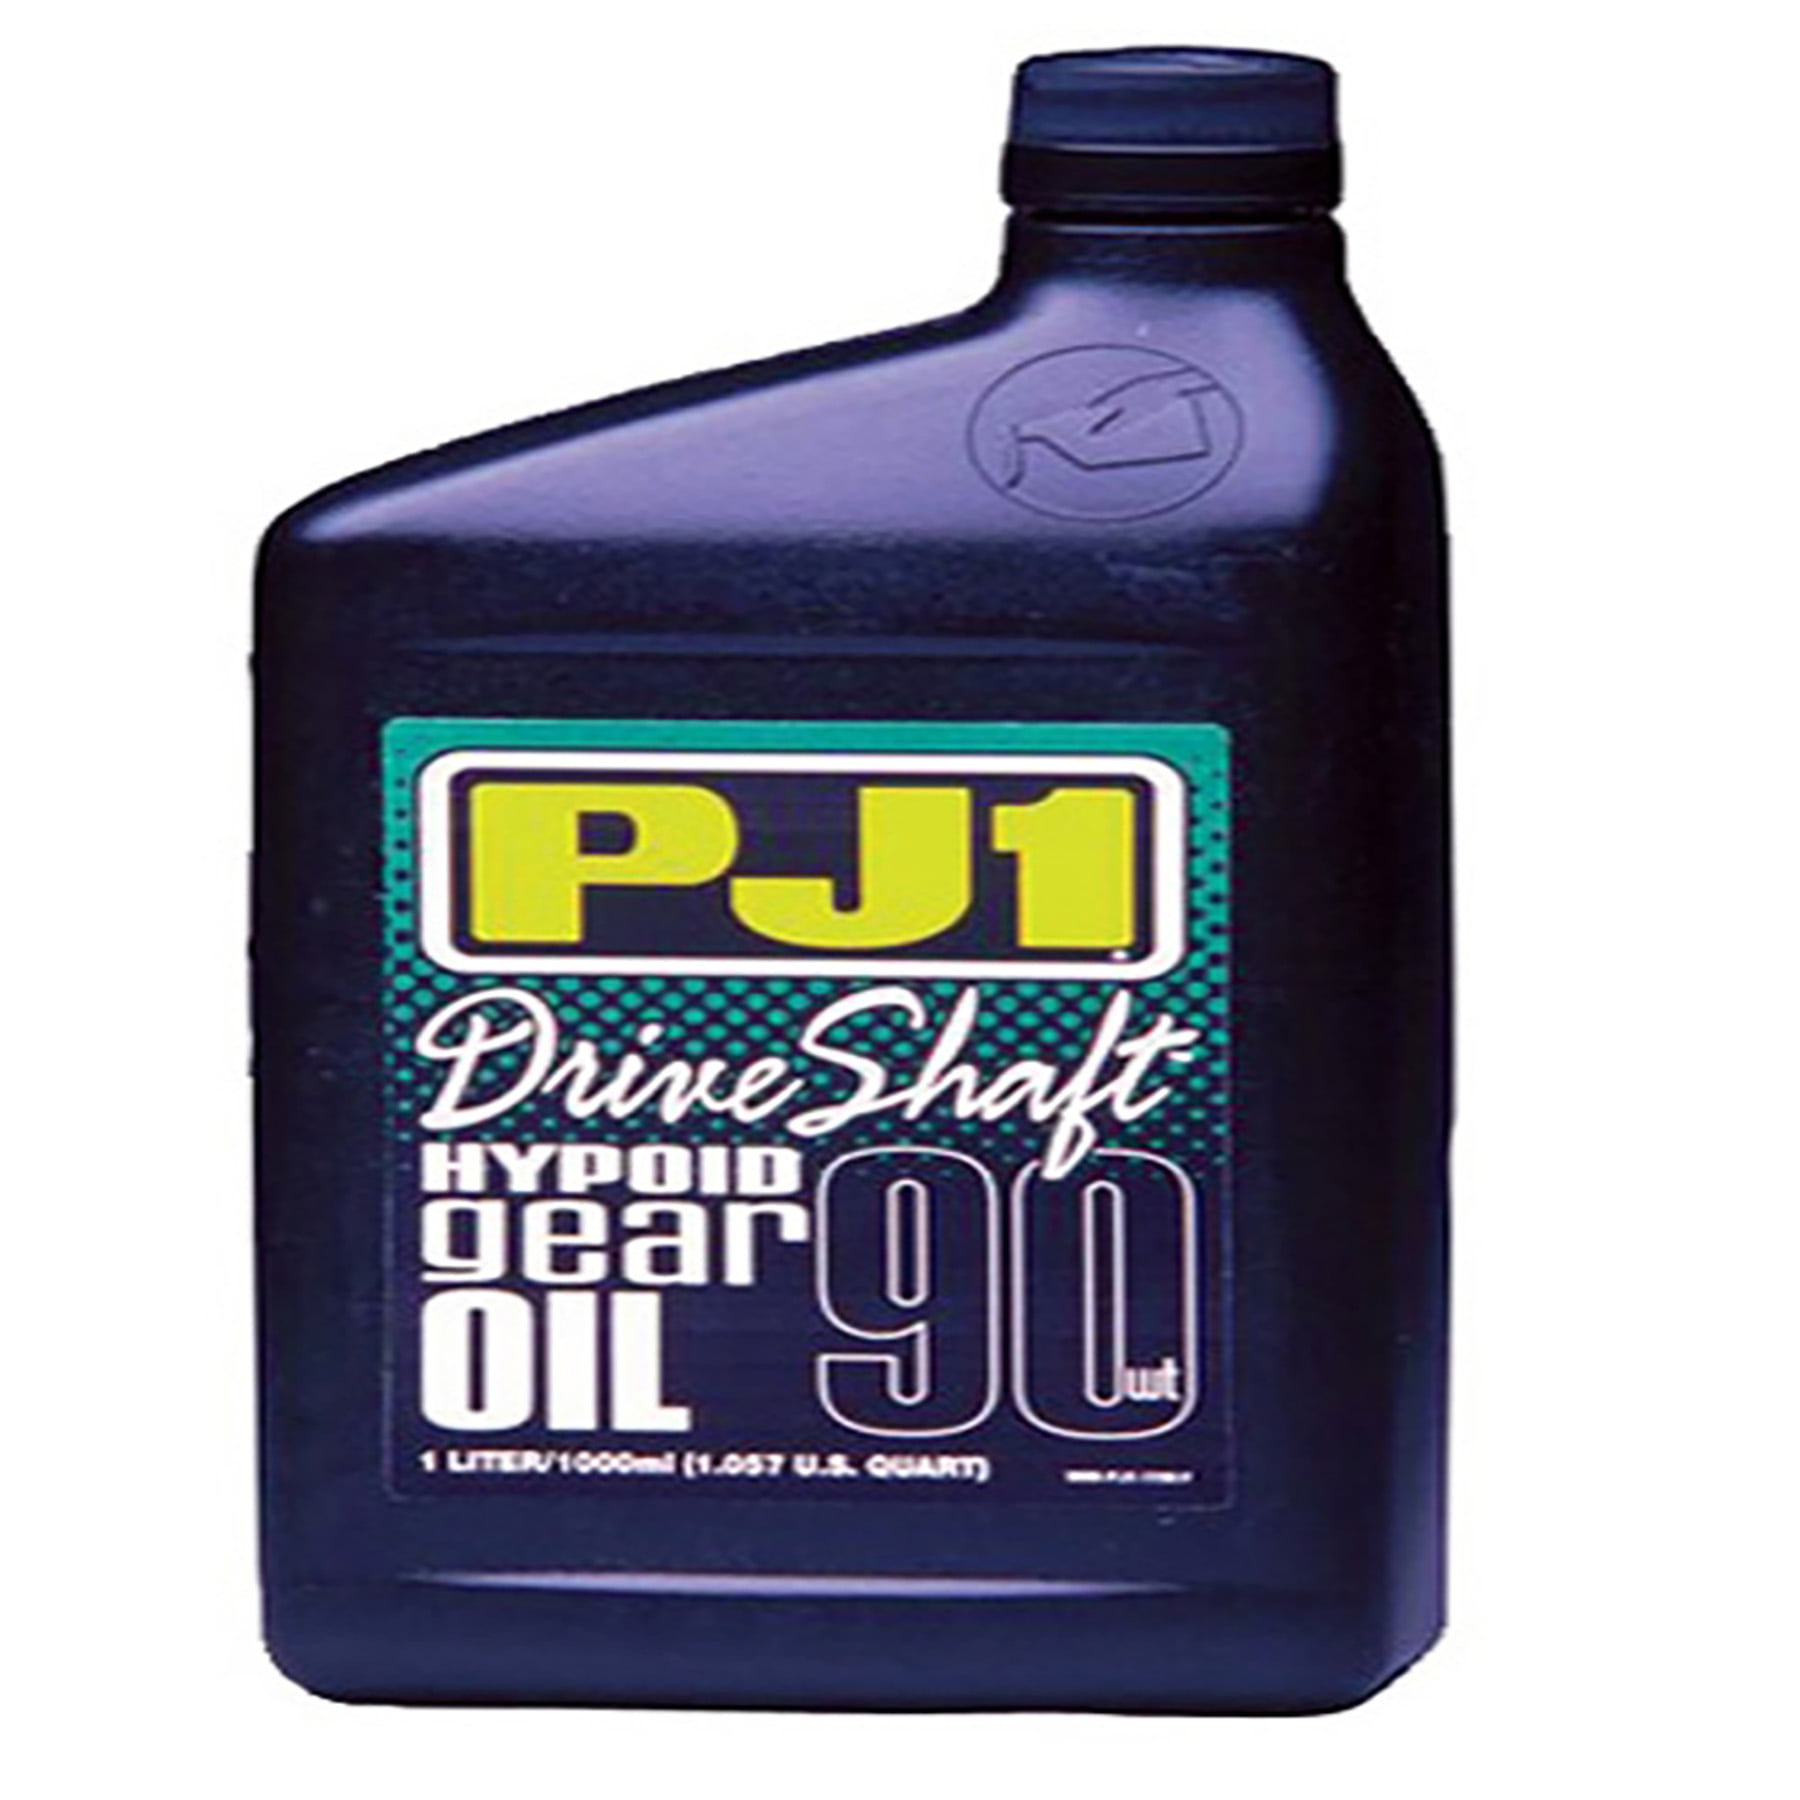 PJ1 HYPOID 90W GEAR OIL,1 LITER - Walmart.com - Walmart.com How To Get Gear Oil Out Of Clothes